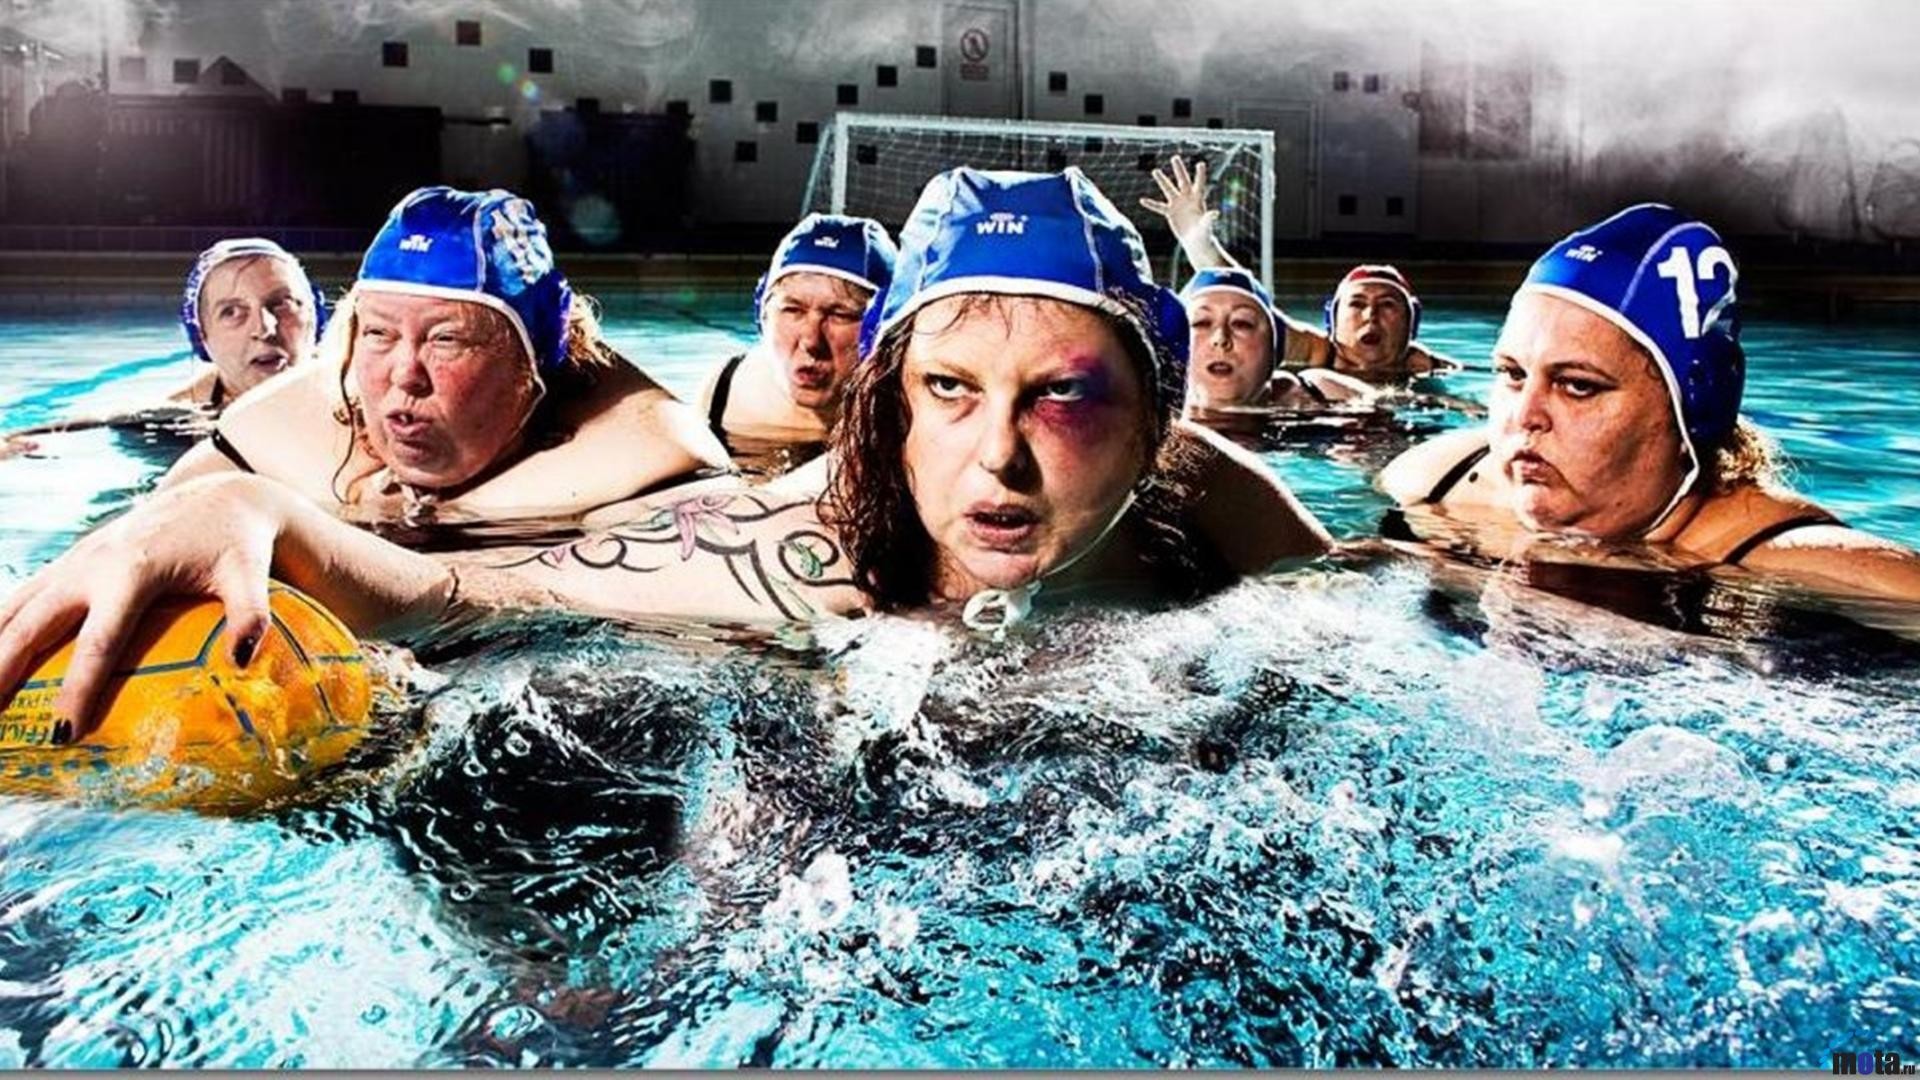 1920x1080 76 best Water Polooo-Swimminnngg images on Pinterest | Water polo .